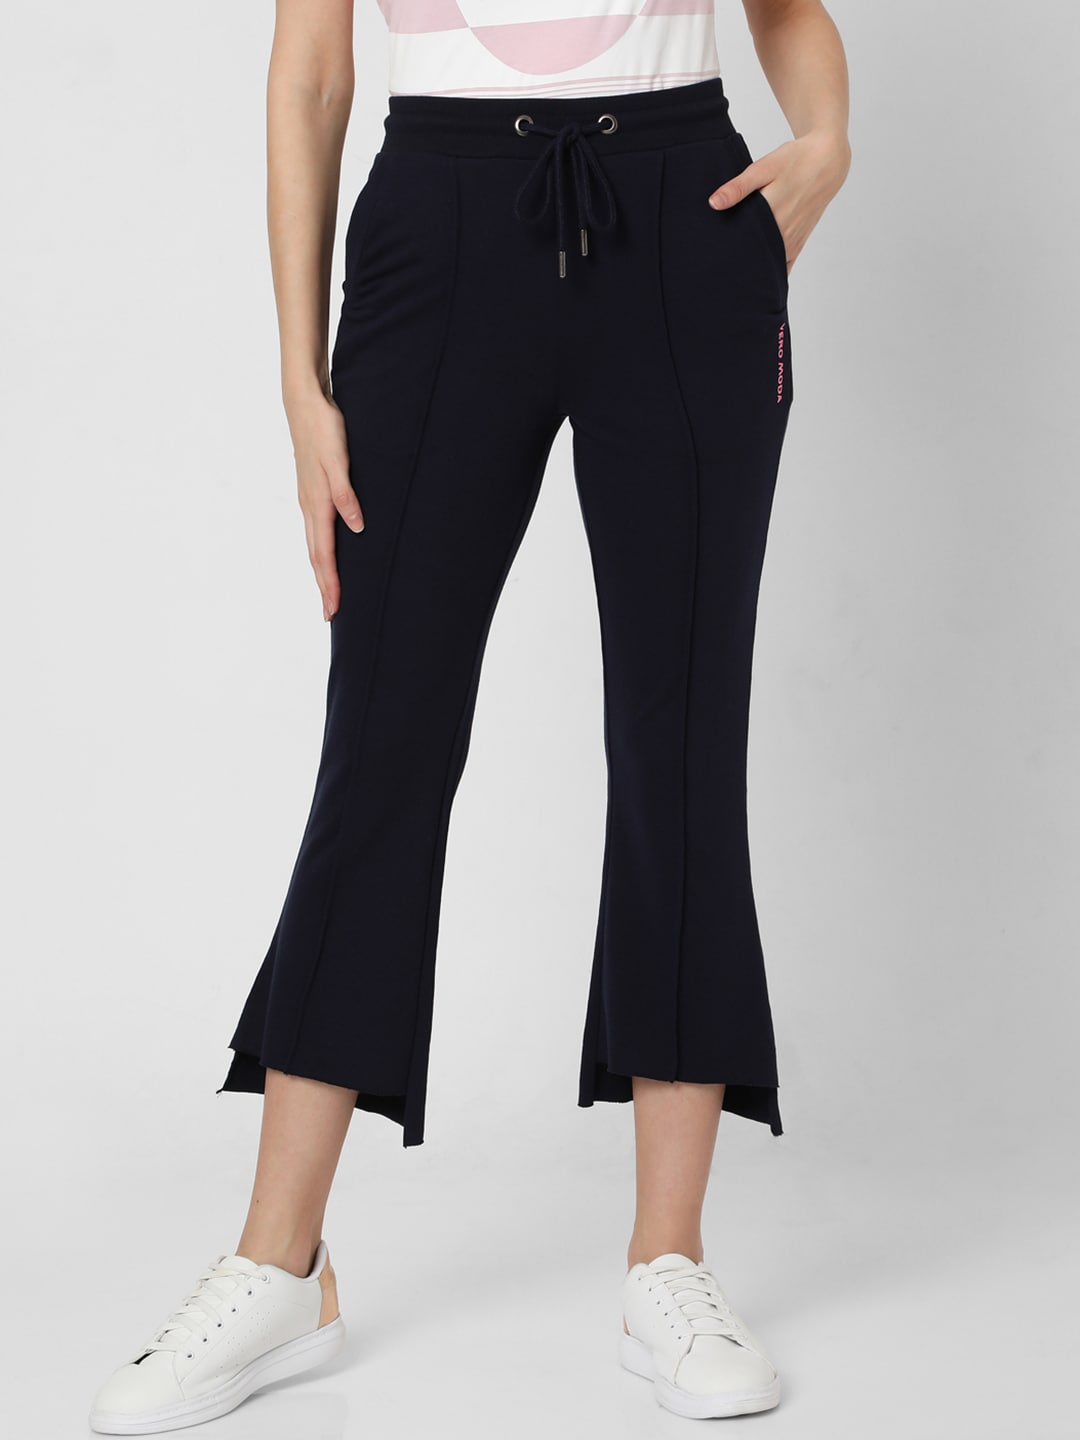 Vero Moda Women Navy Blue Solid Cropped Lounge Pants Price in India